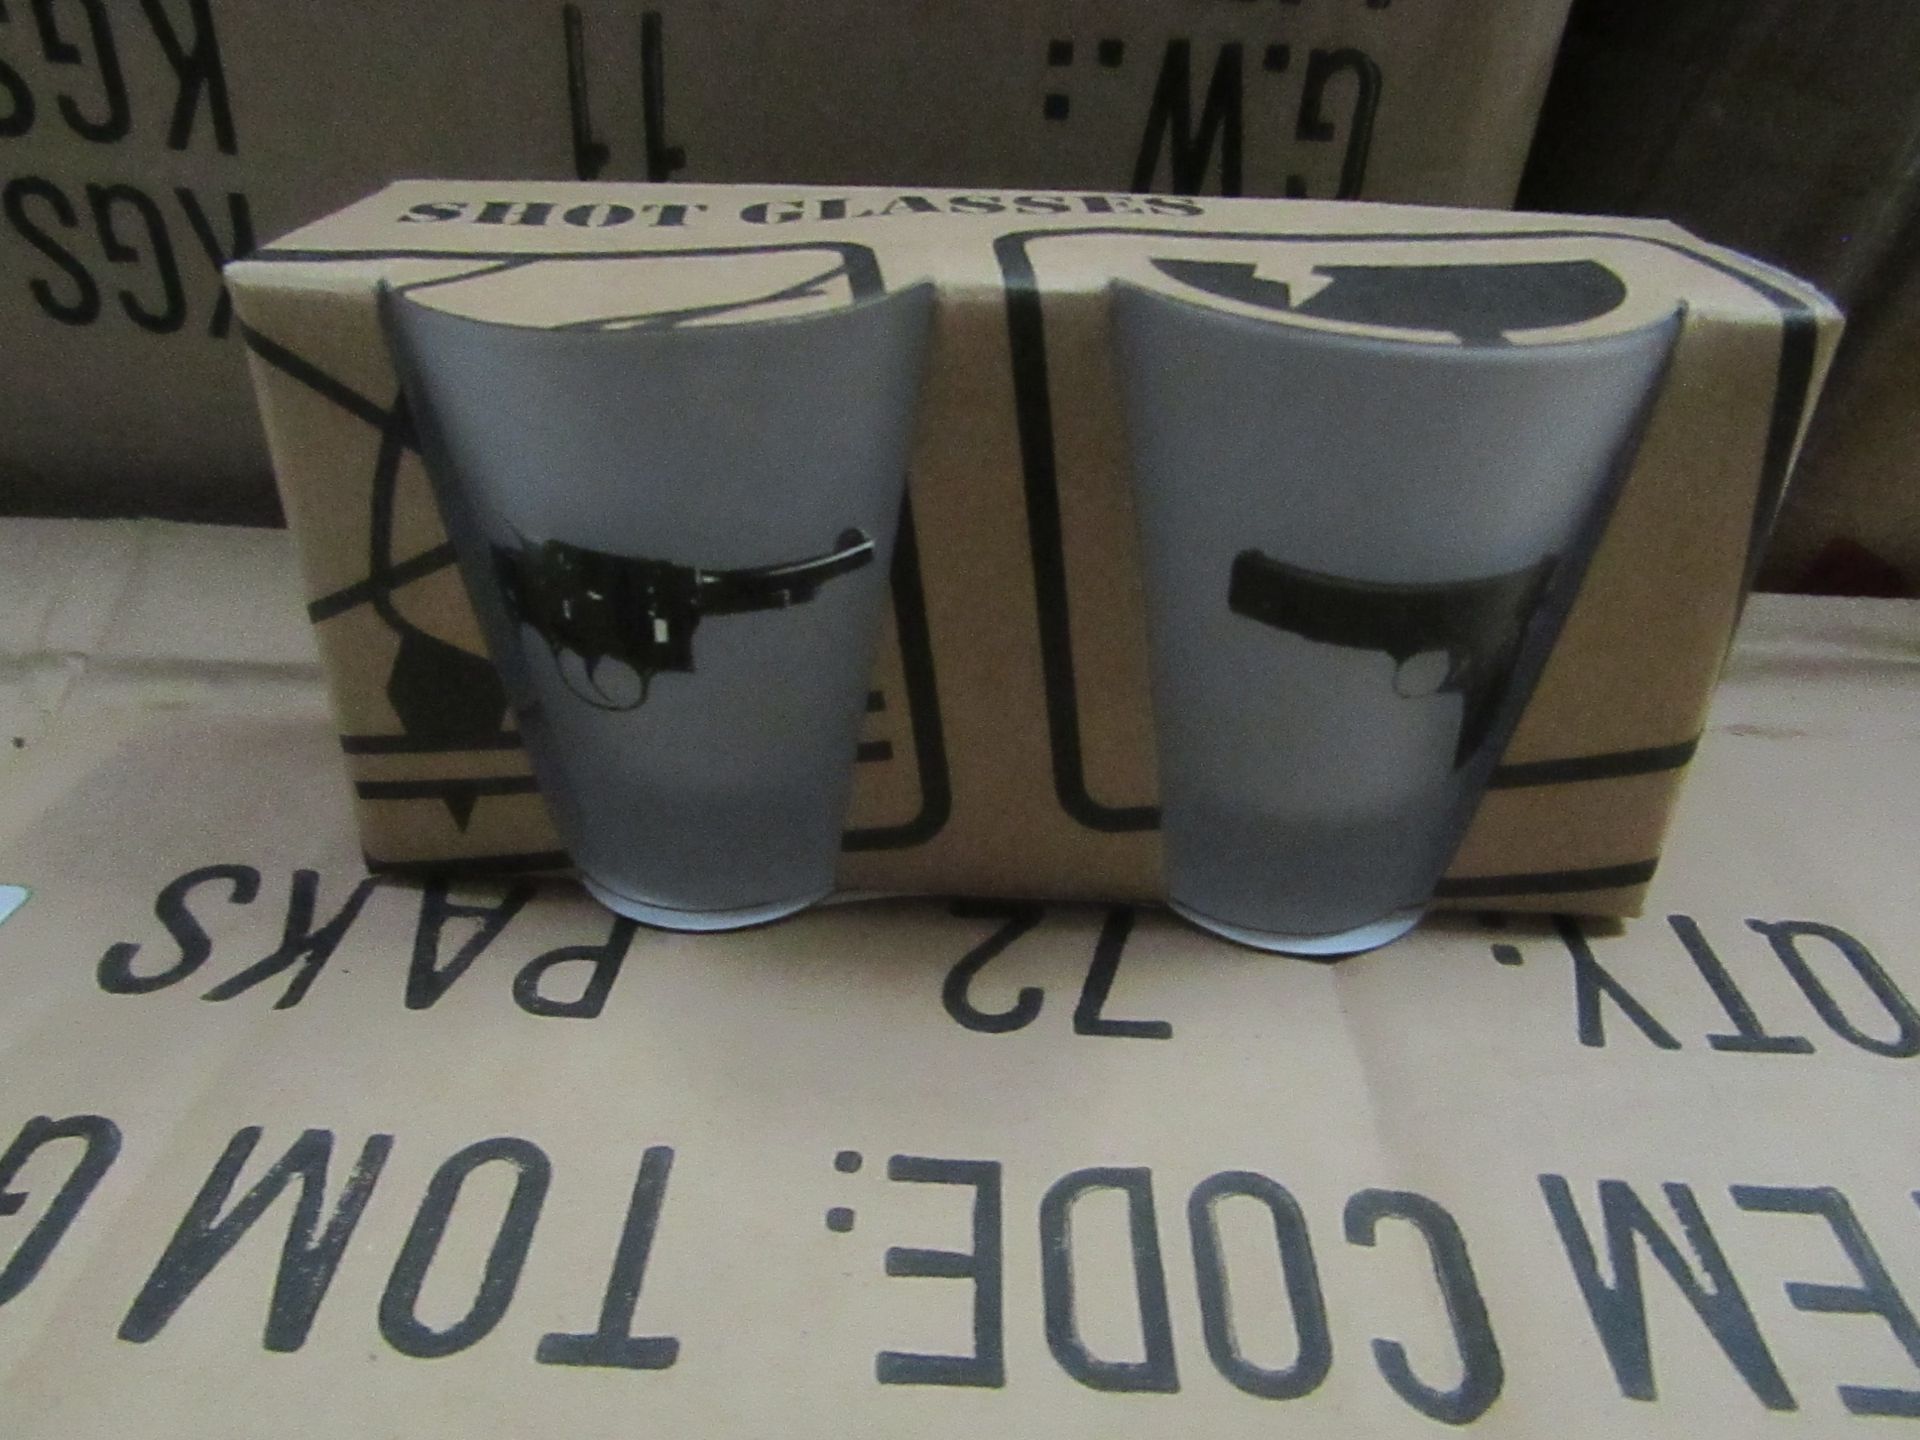 Tom's Depot - Shot Glasses (Cloudy With Gun Photos) - 2x Box of 6 - New & Boxed.